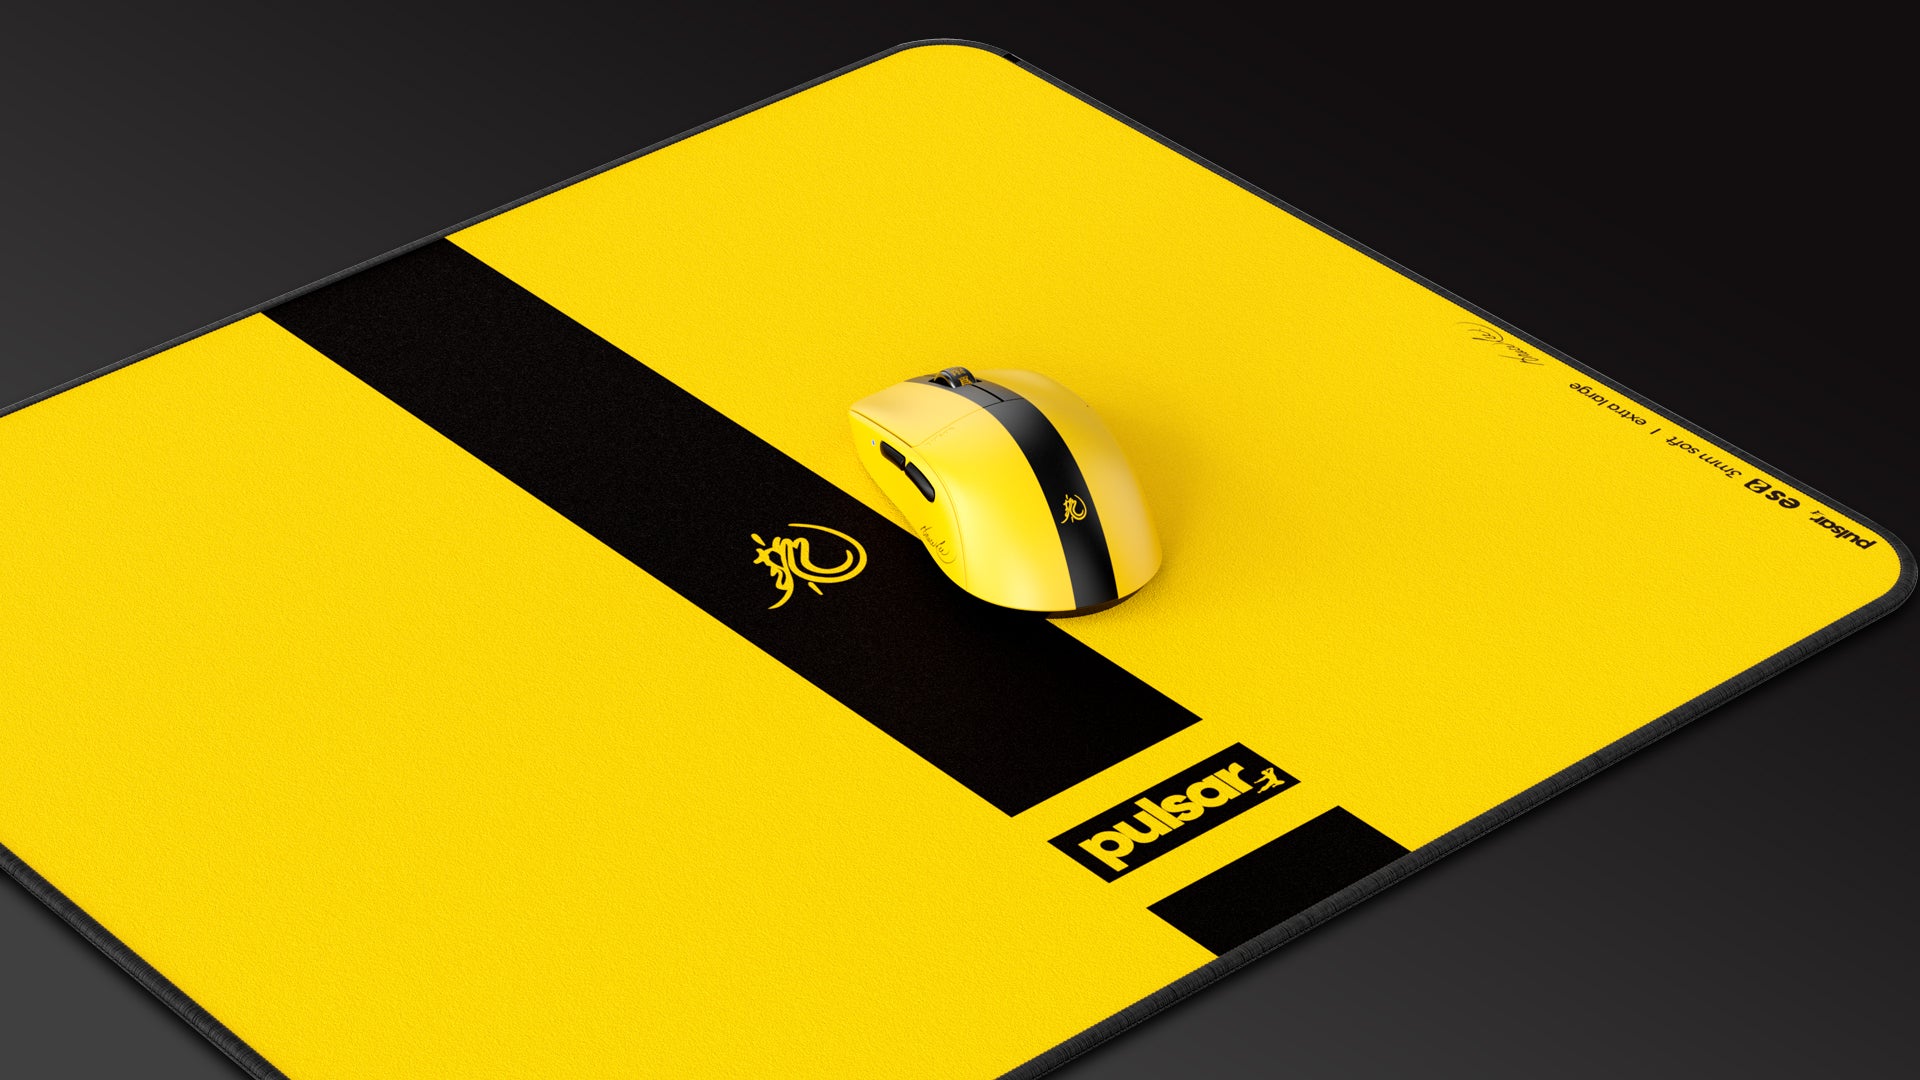 Bruce Lee Edition] X2 Mini Gaming Mouse – Pulsar Gaming Gears